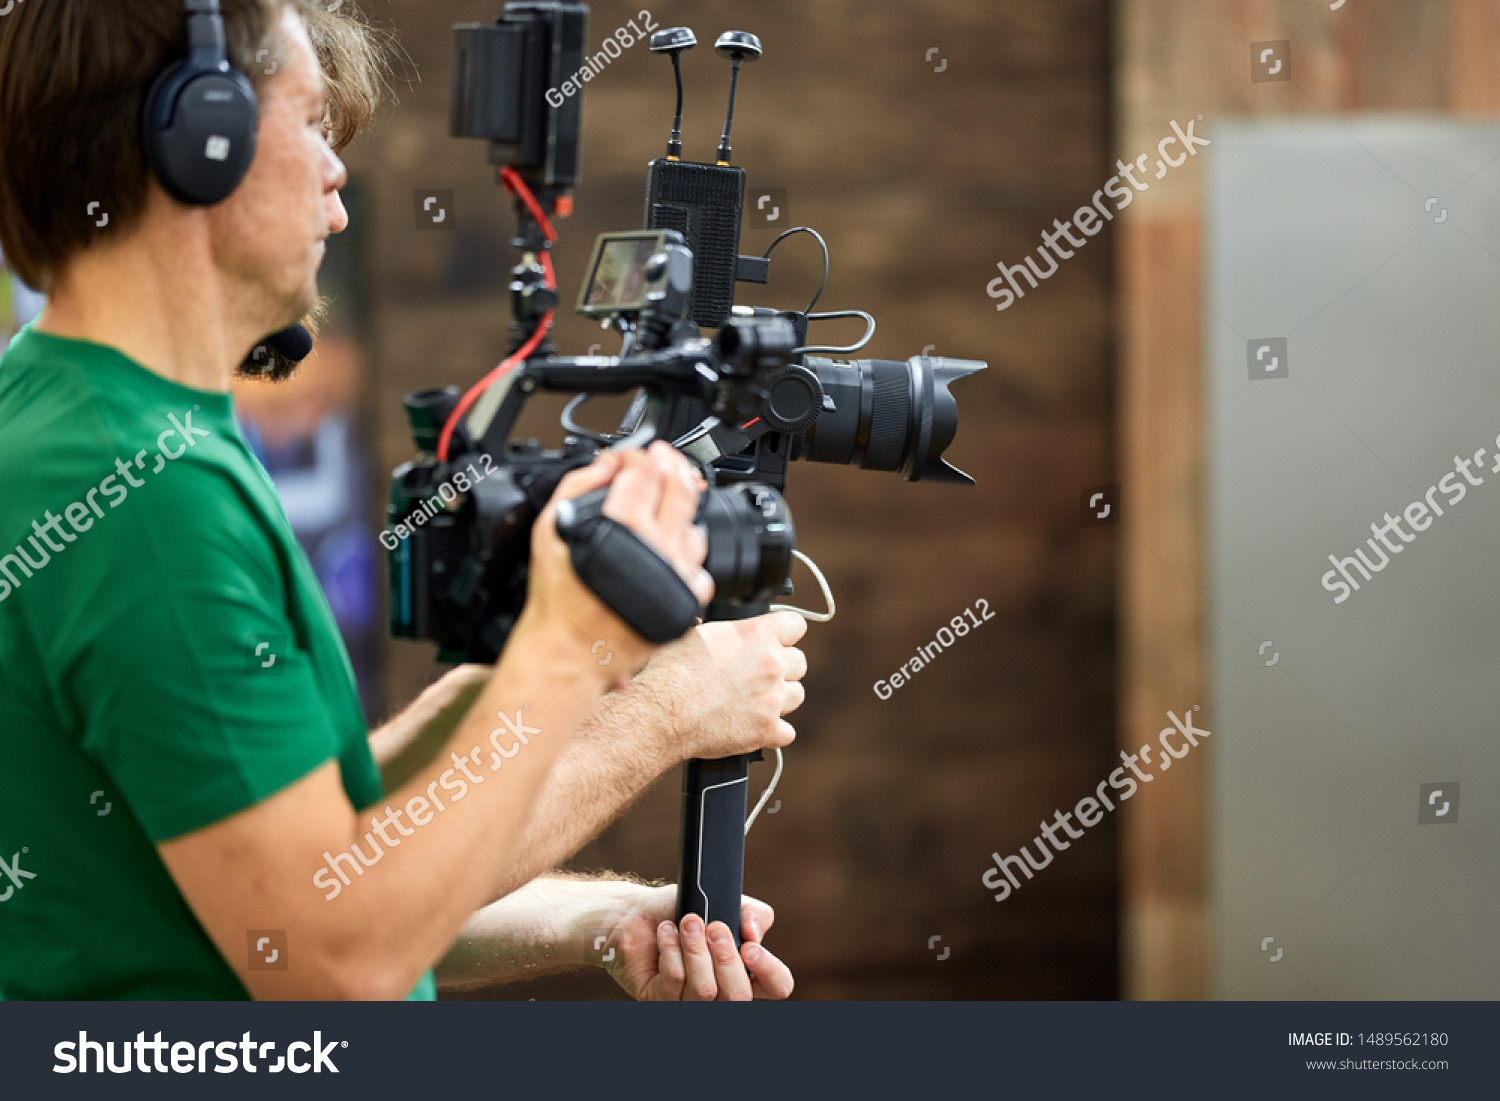 Behind the scenes of filming films or video products and the film crew of the film crew on the set in the pavilion of the film studio. #1489562180